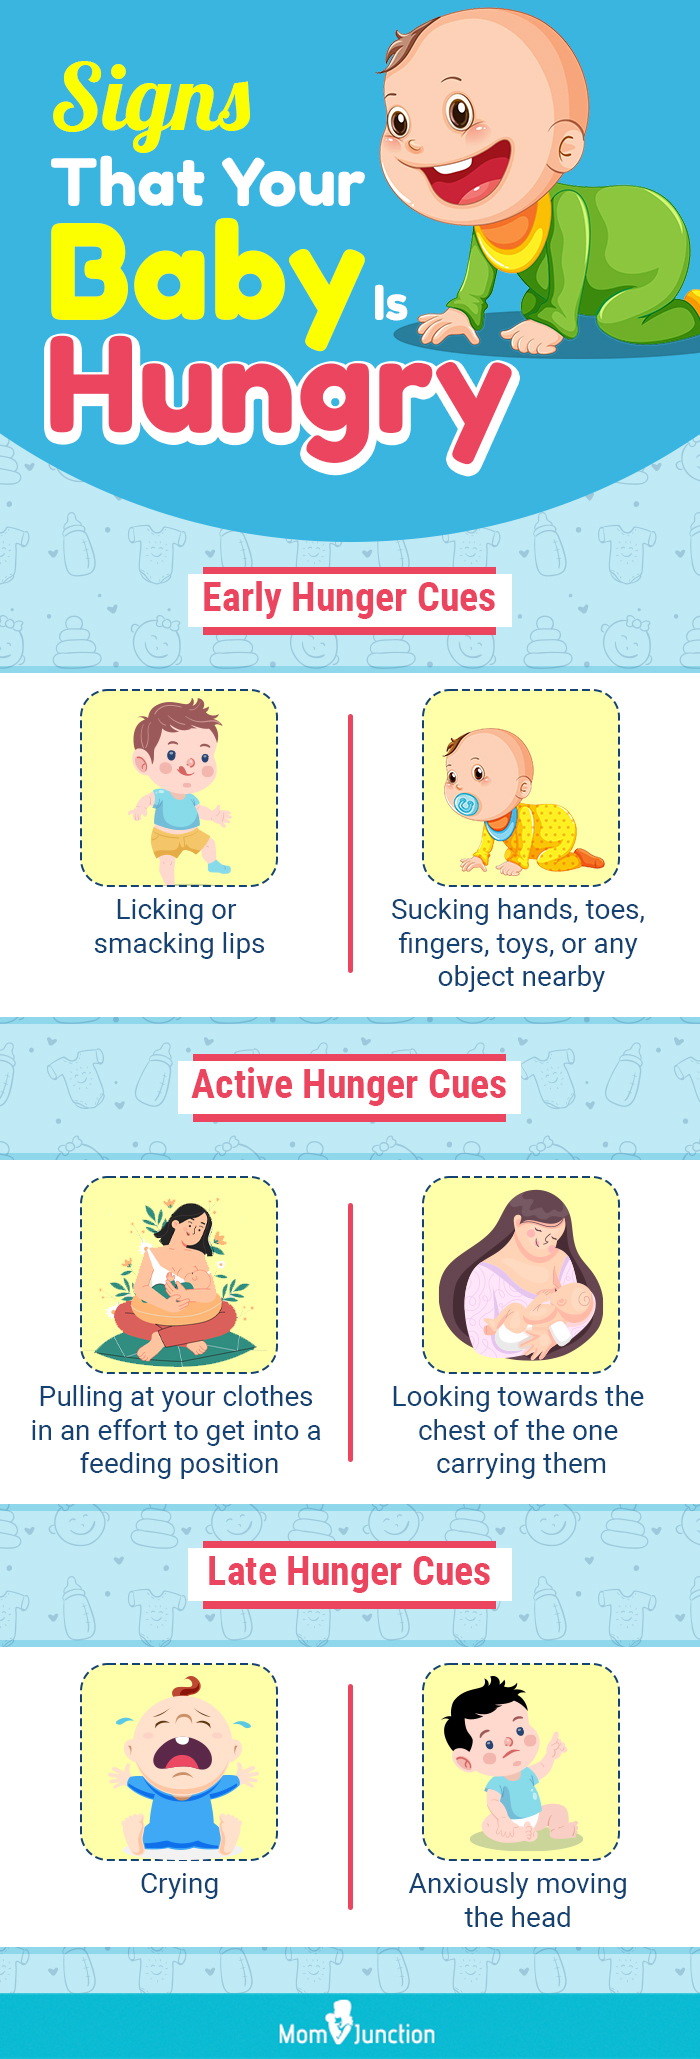 signs that your baby is hungry (infographic)